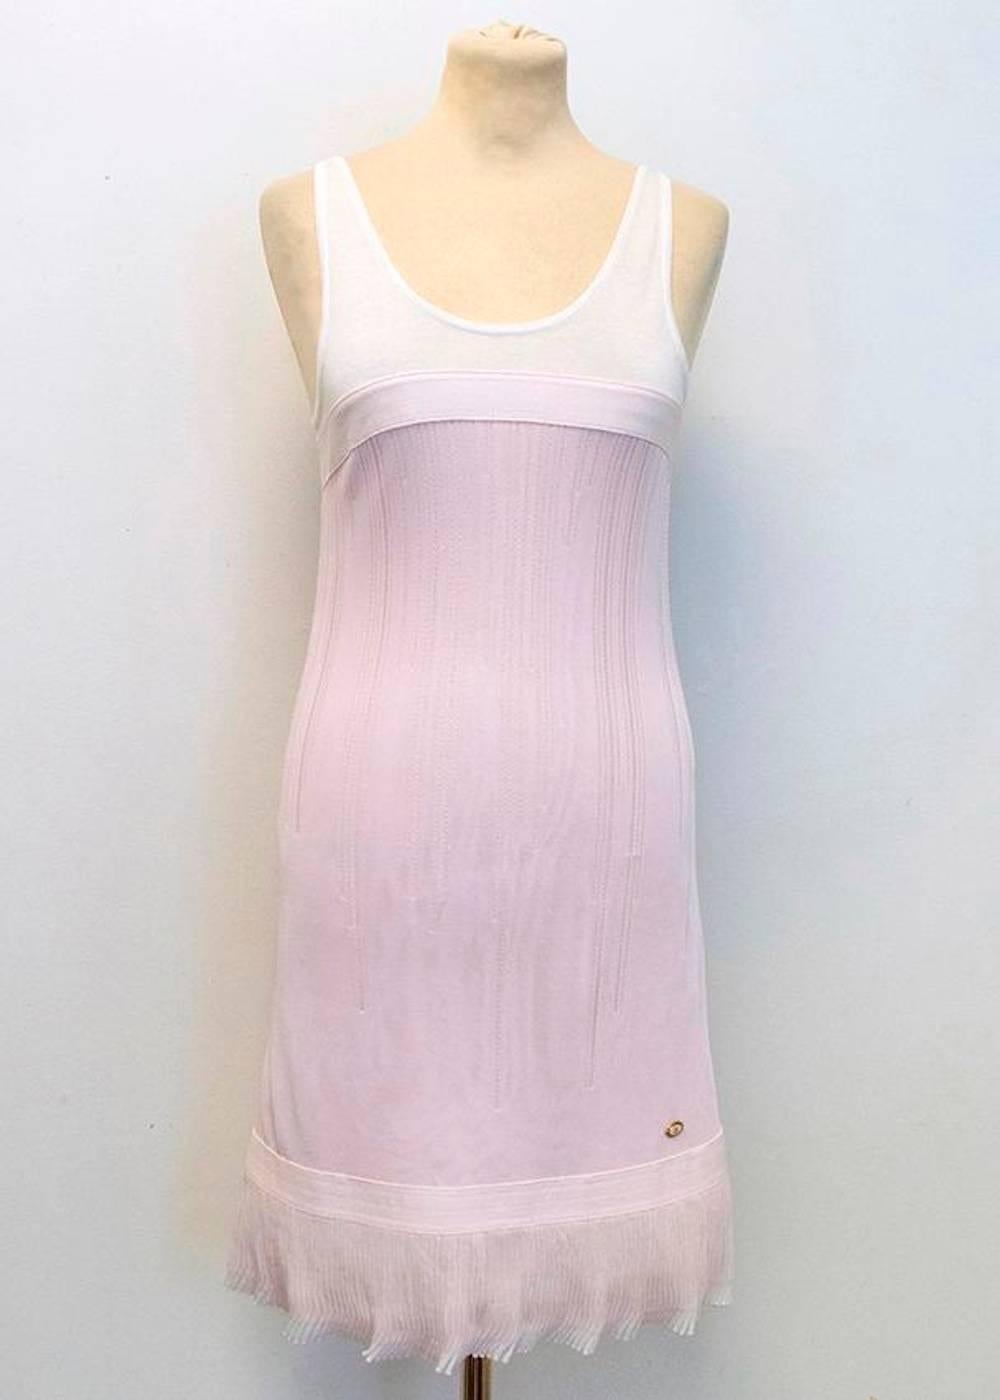 Chanel Pink and White Sleeveless Dress 1